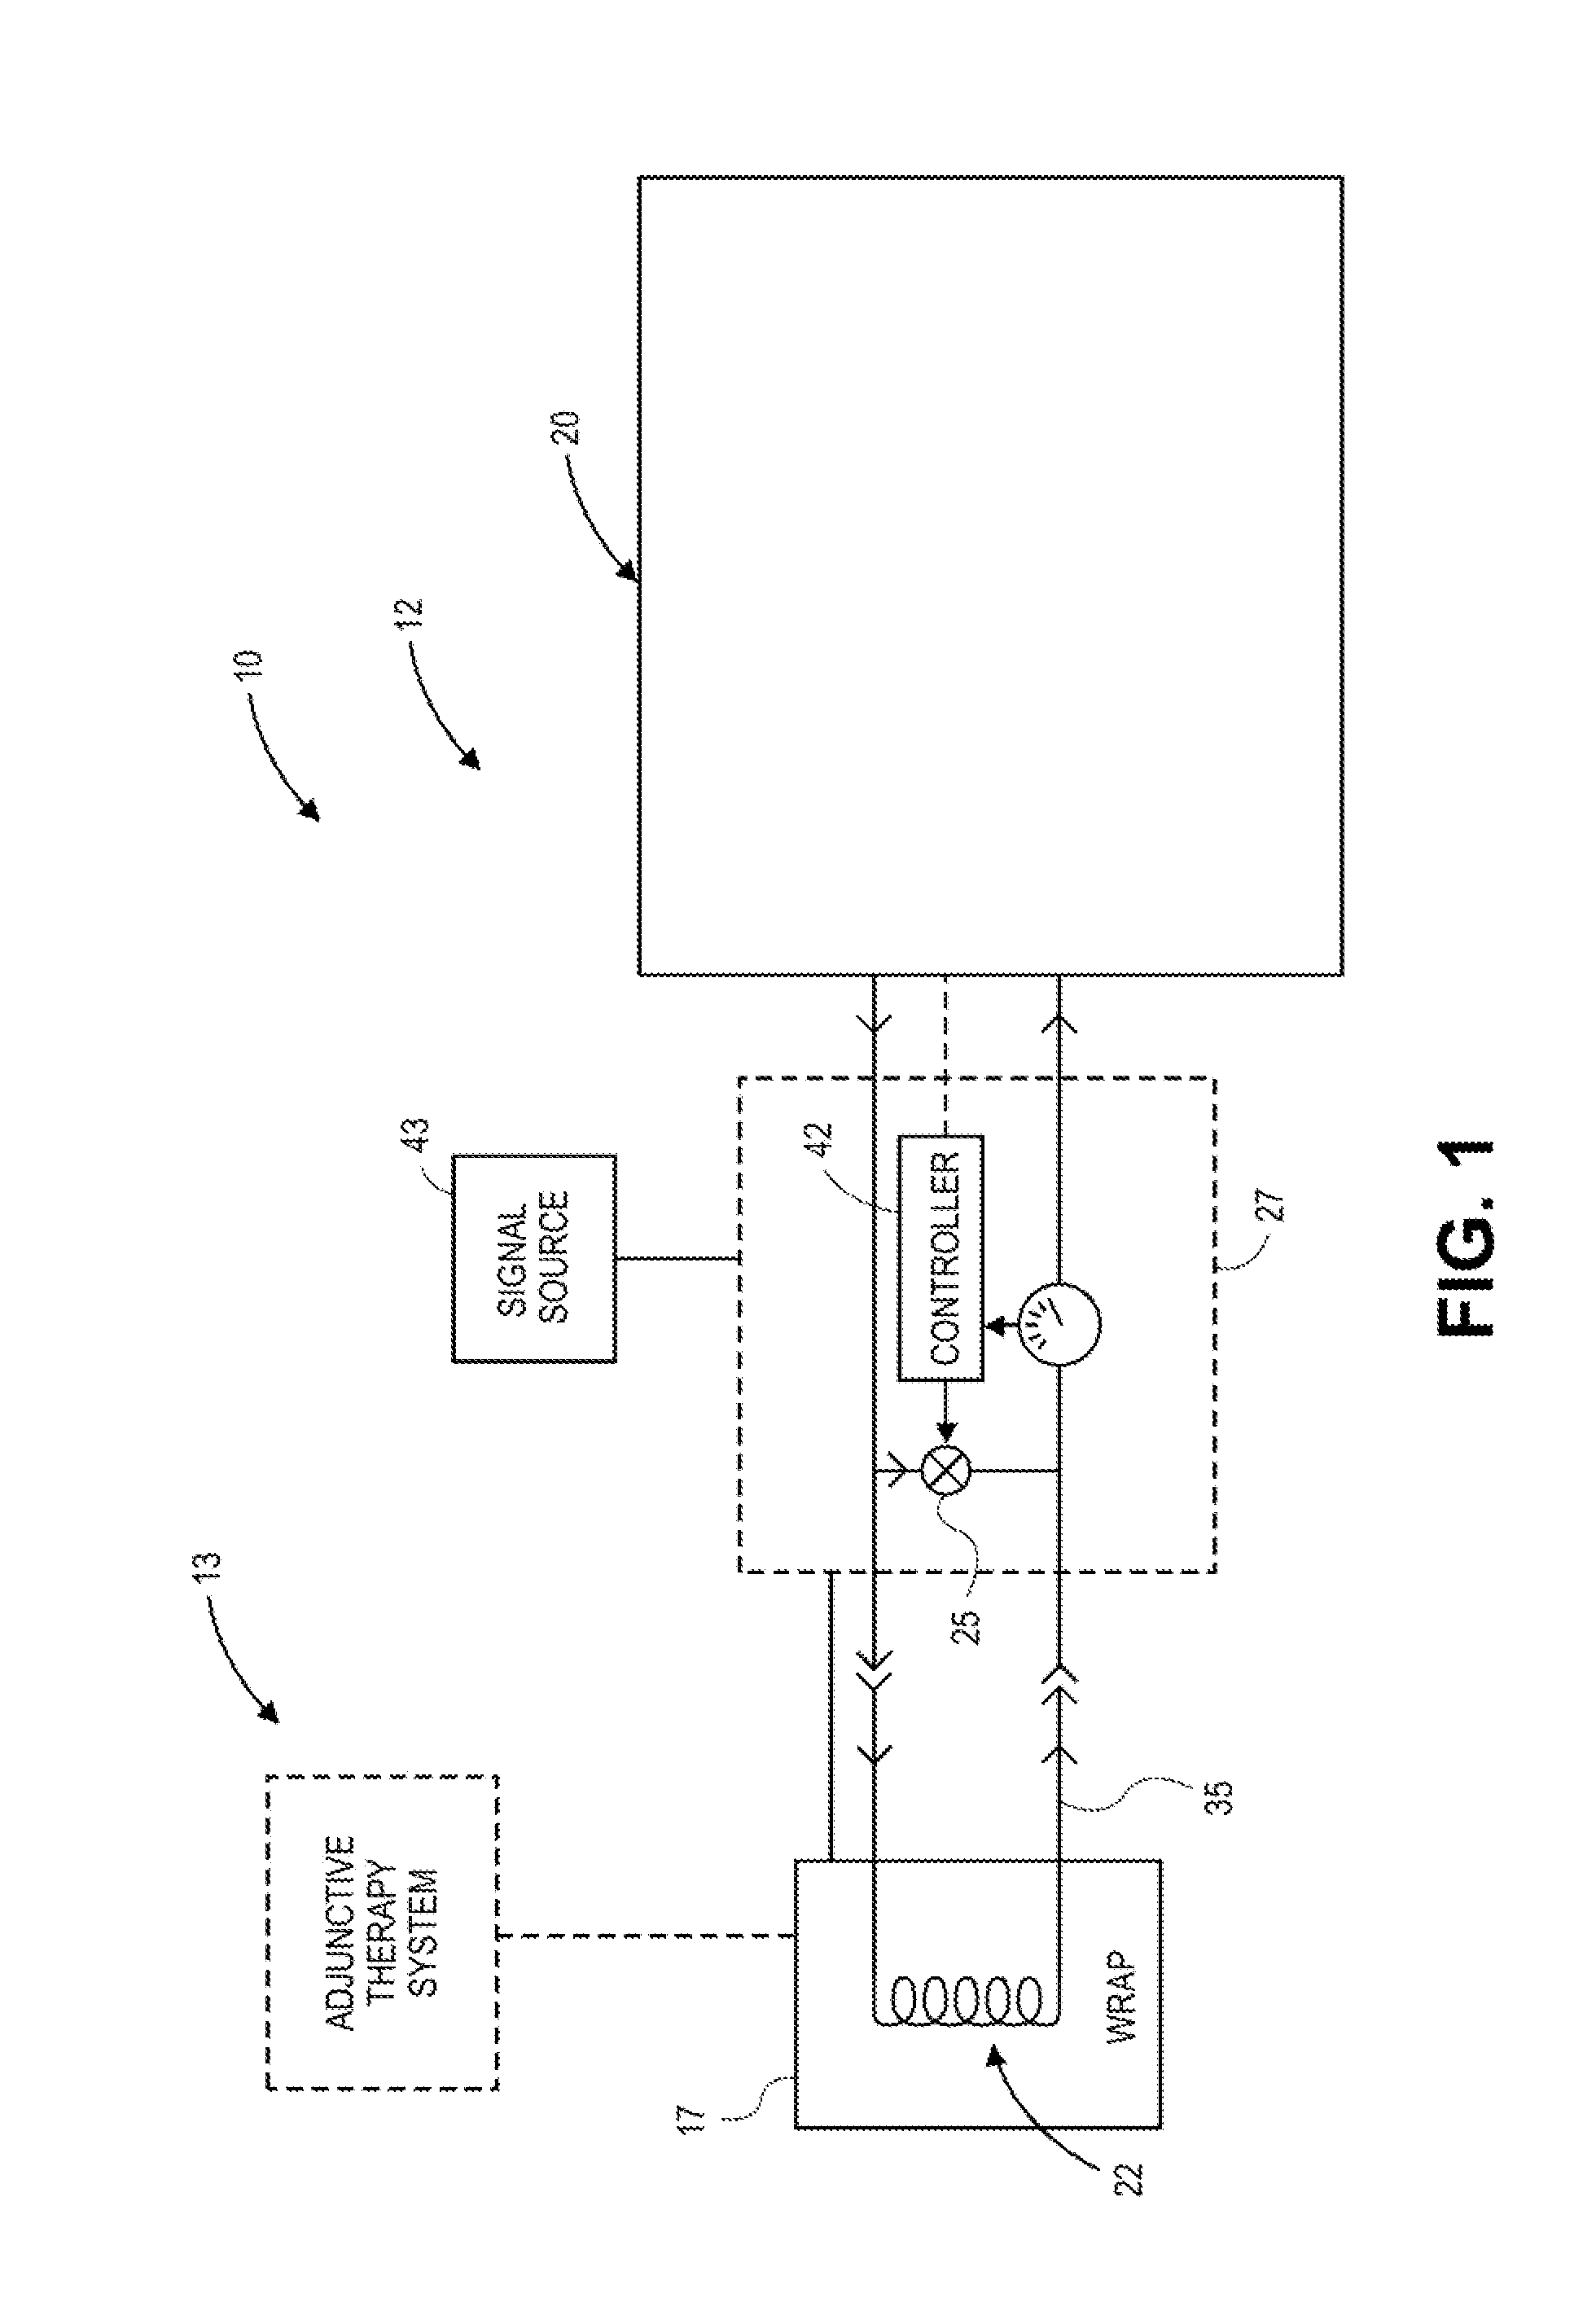 System for Providing Treatment to a Mammal and Method